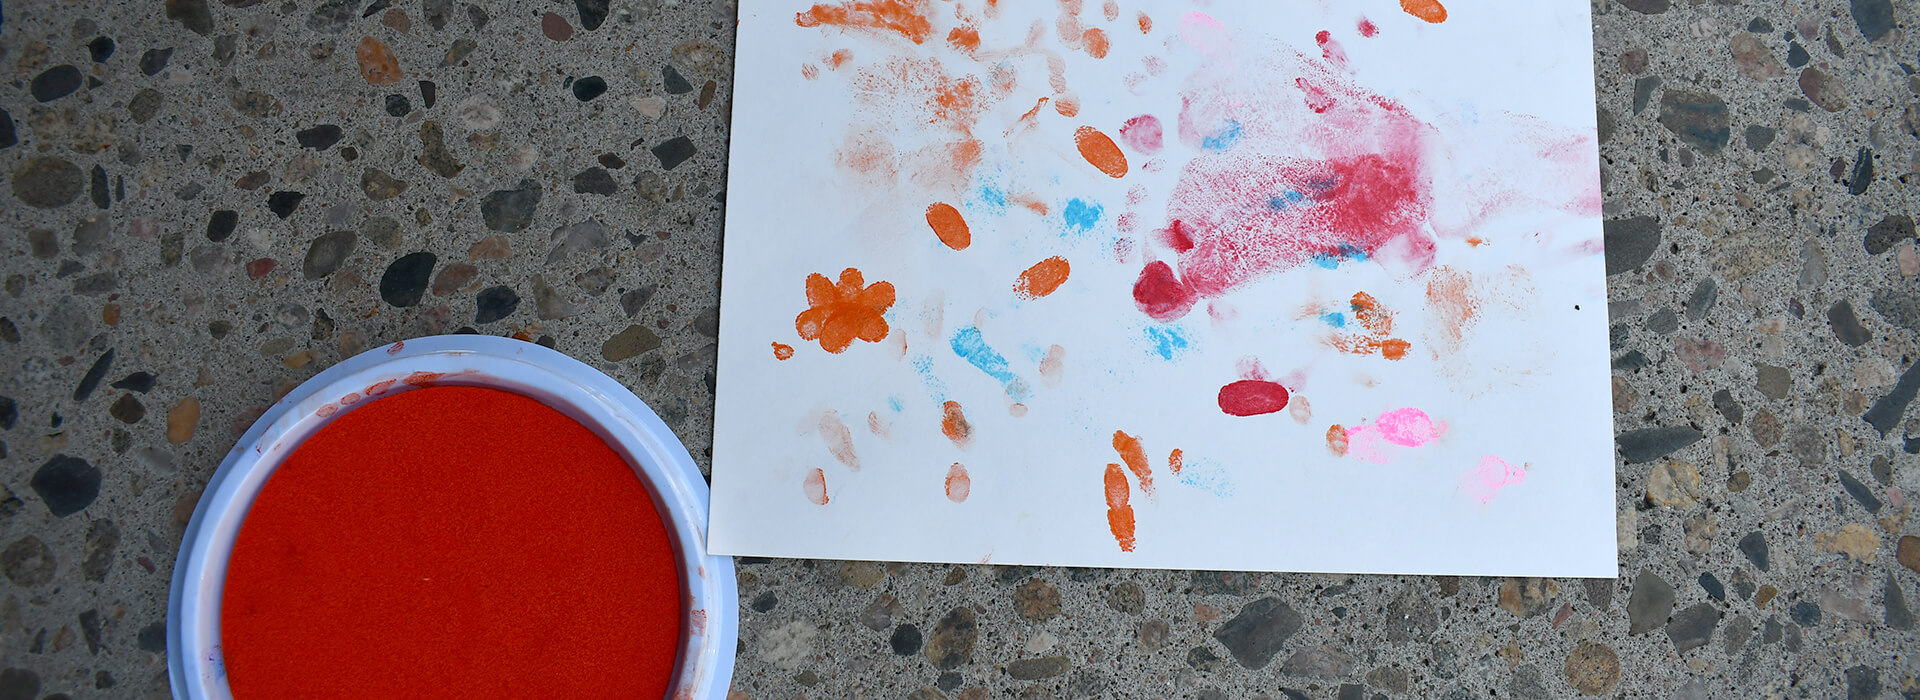 Baby hand and footprints in paint on paper